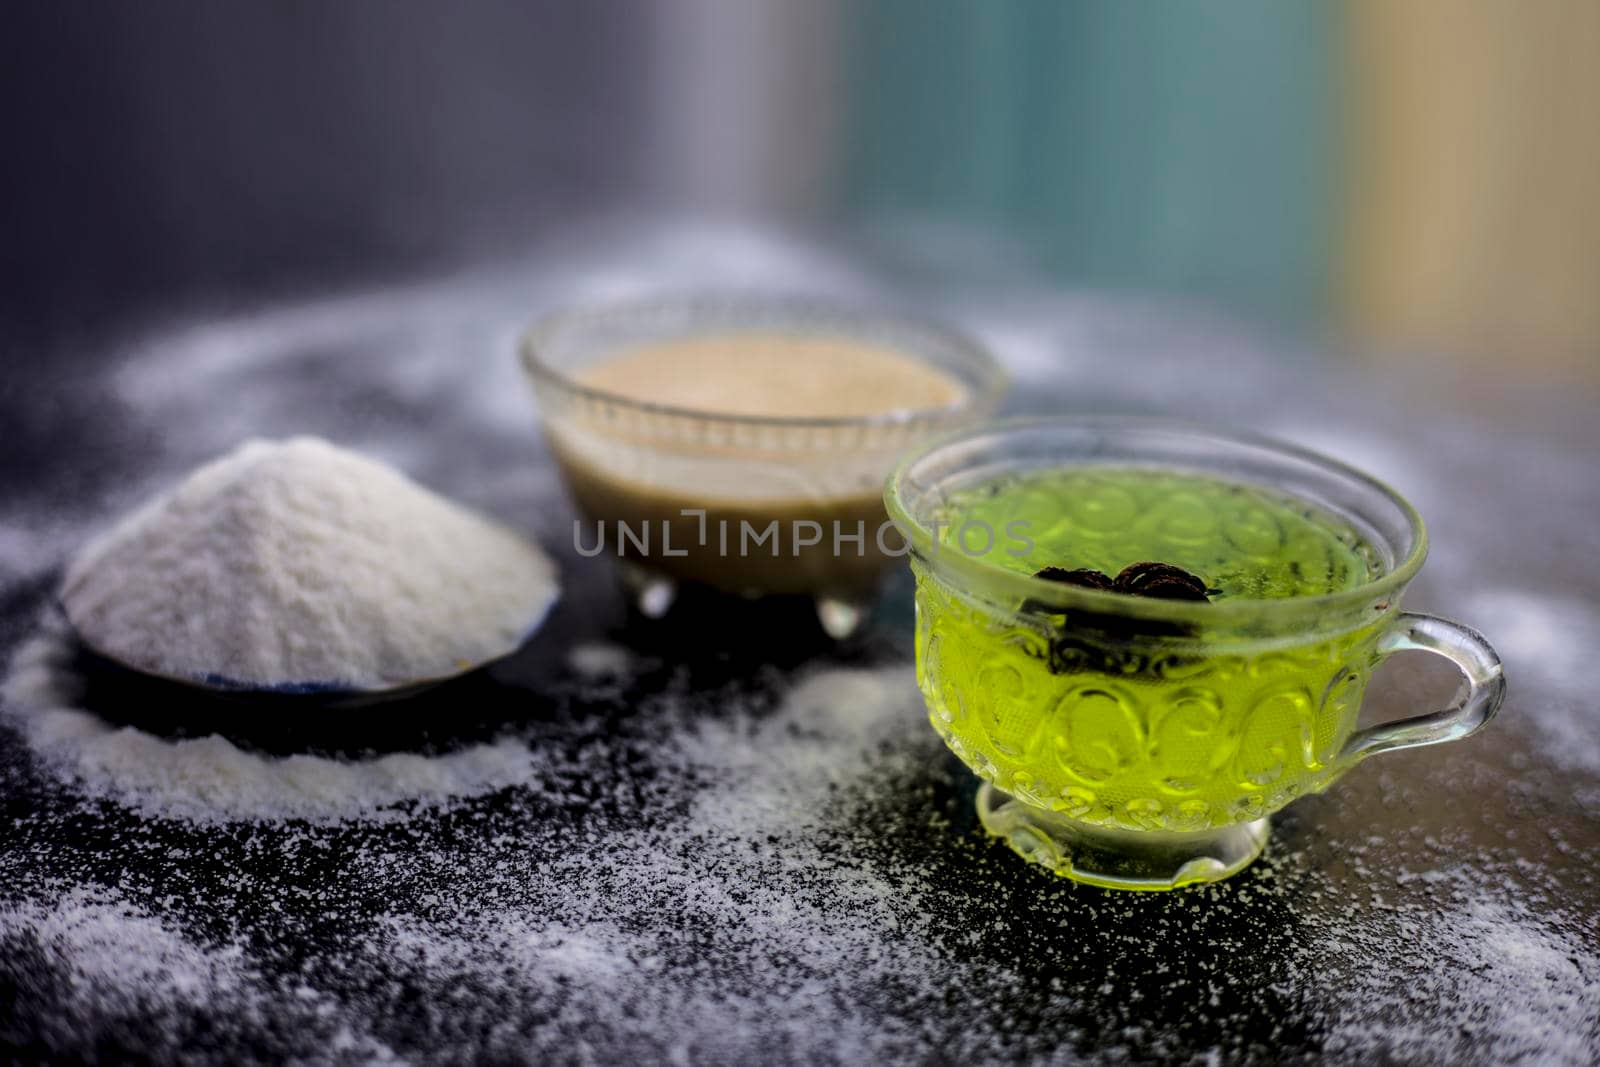 Rice flour and rice grain on wooden surface along with some green tea in a transparent glass cup and a star anise in it.Face mask for the treatment for smoother skin. by mirzamlk